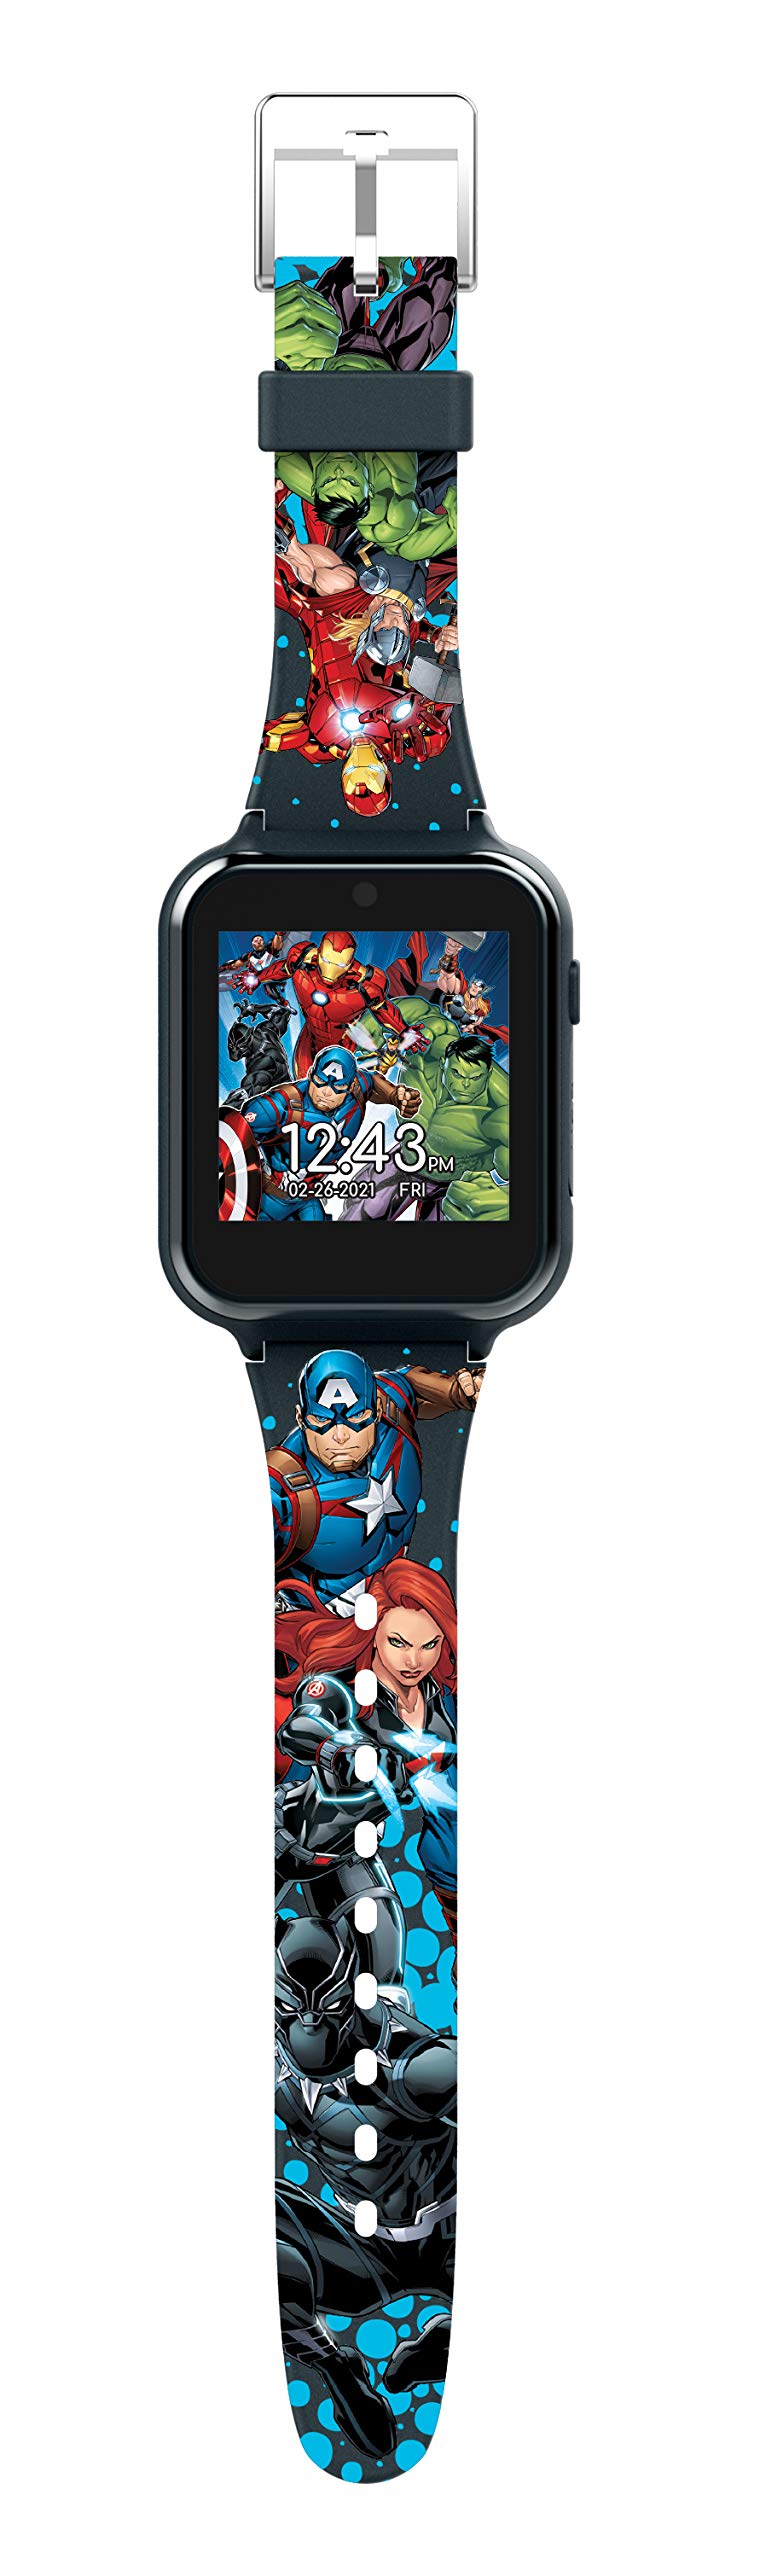 Accutime Kids Marvel Avengers Black Educational Touchscreen Smart Watch Toy for Girls, Boys, Toddlers - Selfie Cam, Learning Games, Alarm, Calculator, Pedometer and more (Model: AVG4597AZ)